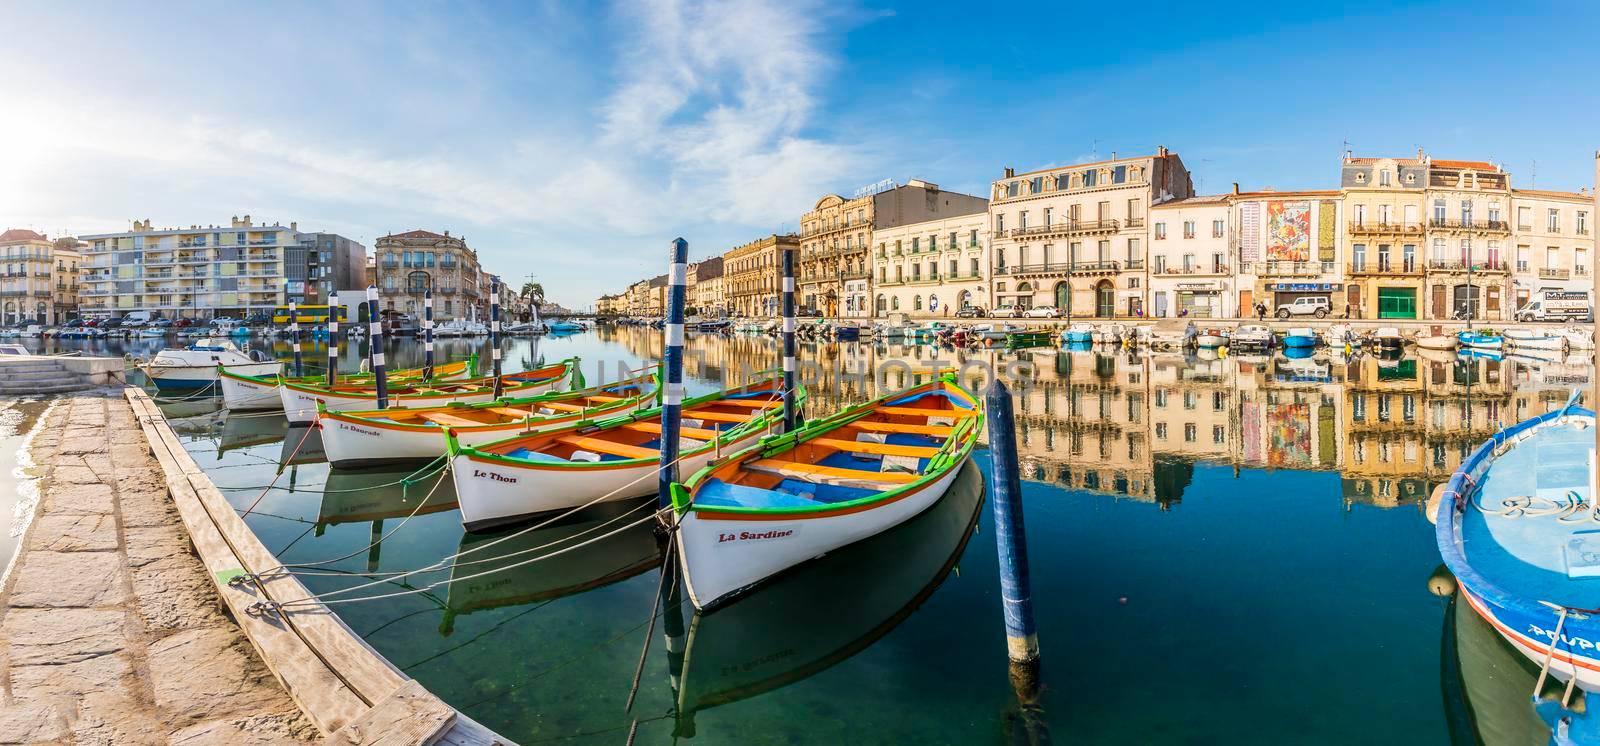 Typical boats of Sète on the royal cana, l in Sète, in Hérault, in Occitanie, France by Frederic